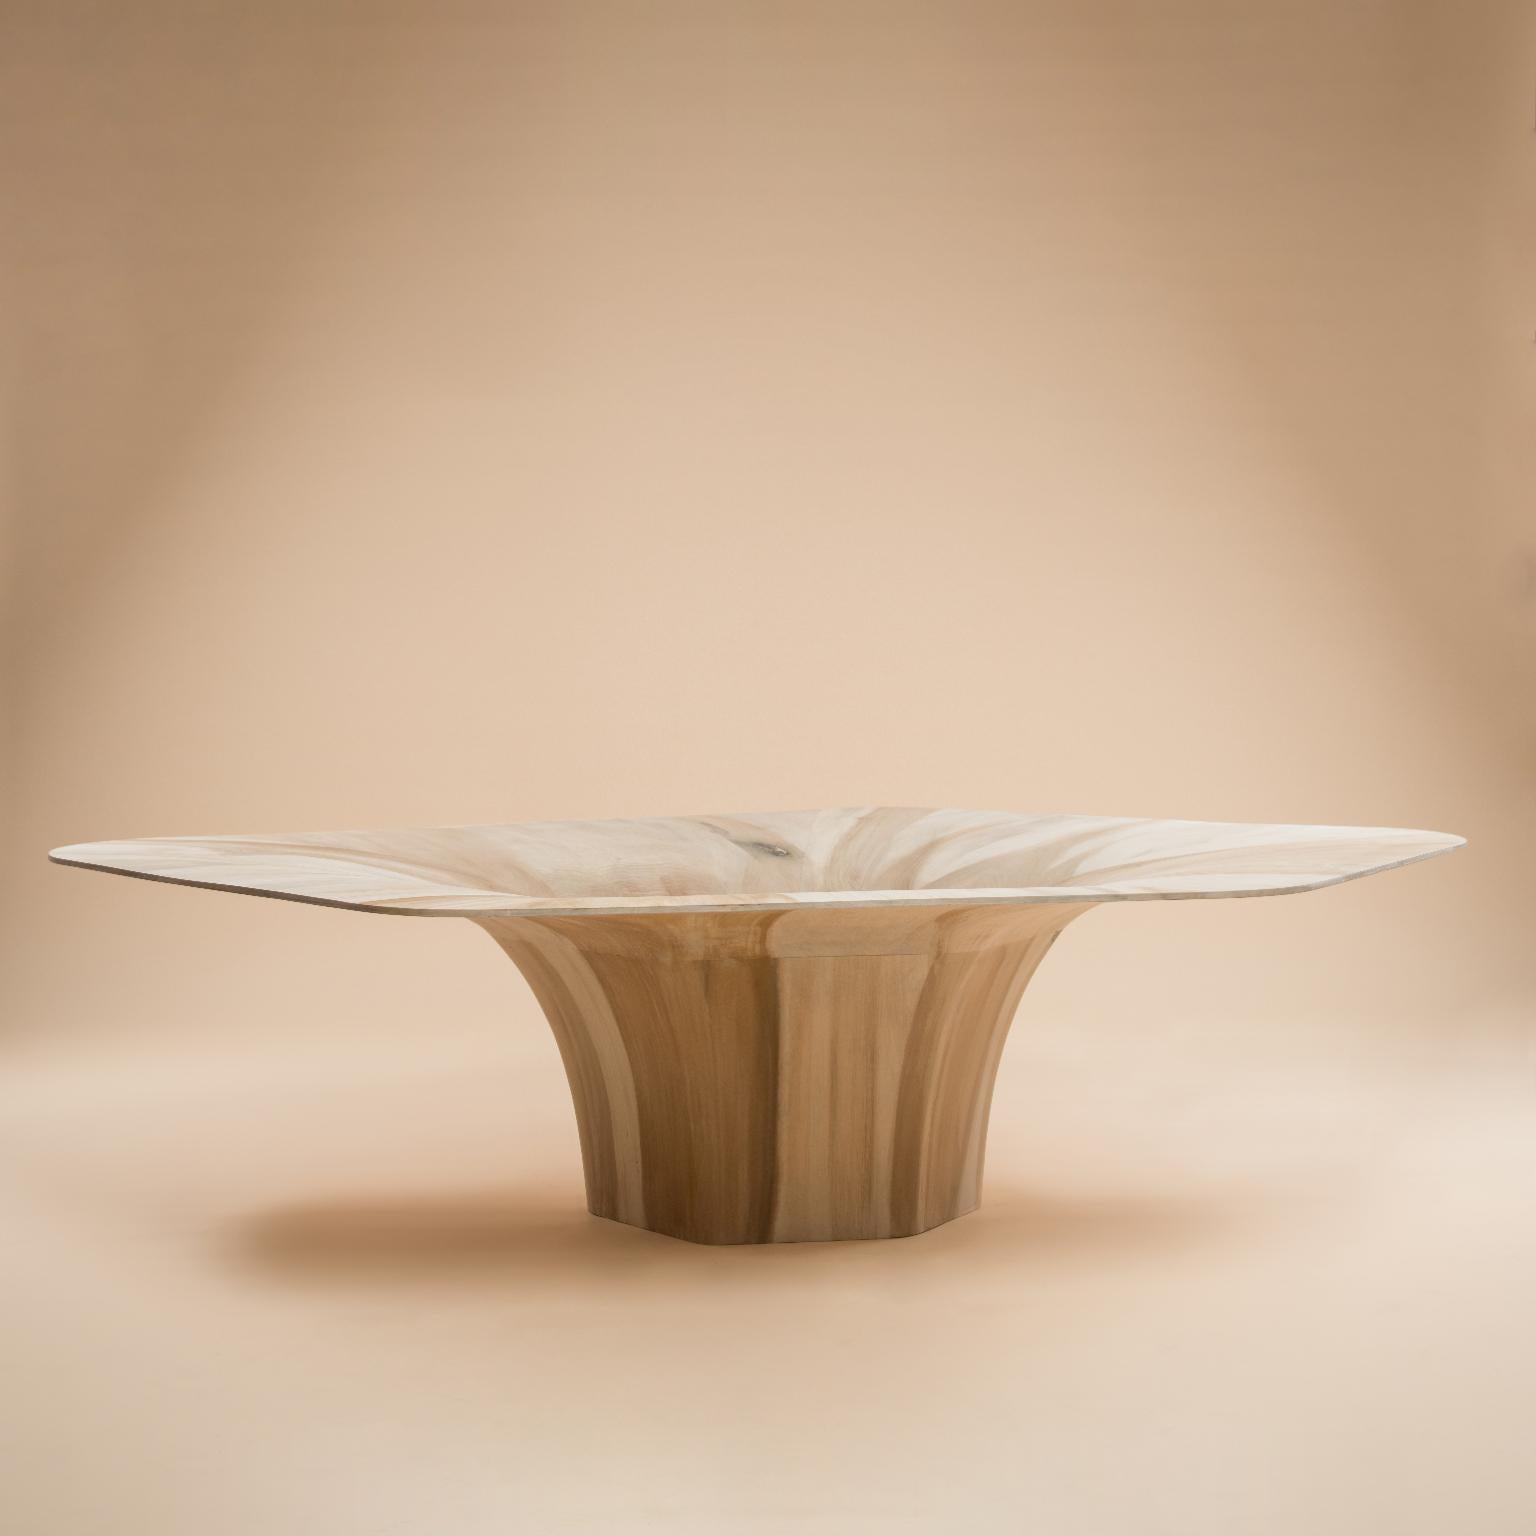 Sculptural dune coffee table by Pietro Franceschini
Sold exclusively by Galerie Philia
Dimensions: W 158 x L 96 x H 40 cm
Materials: Sculpted maple wood

Pietro Franceschini is an architect and designer based in New York and Florence. He was